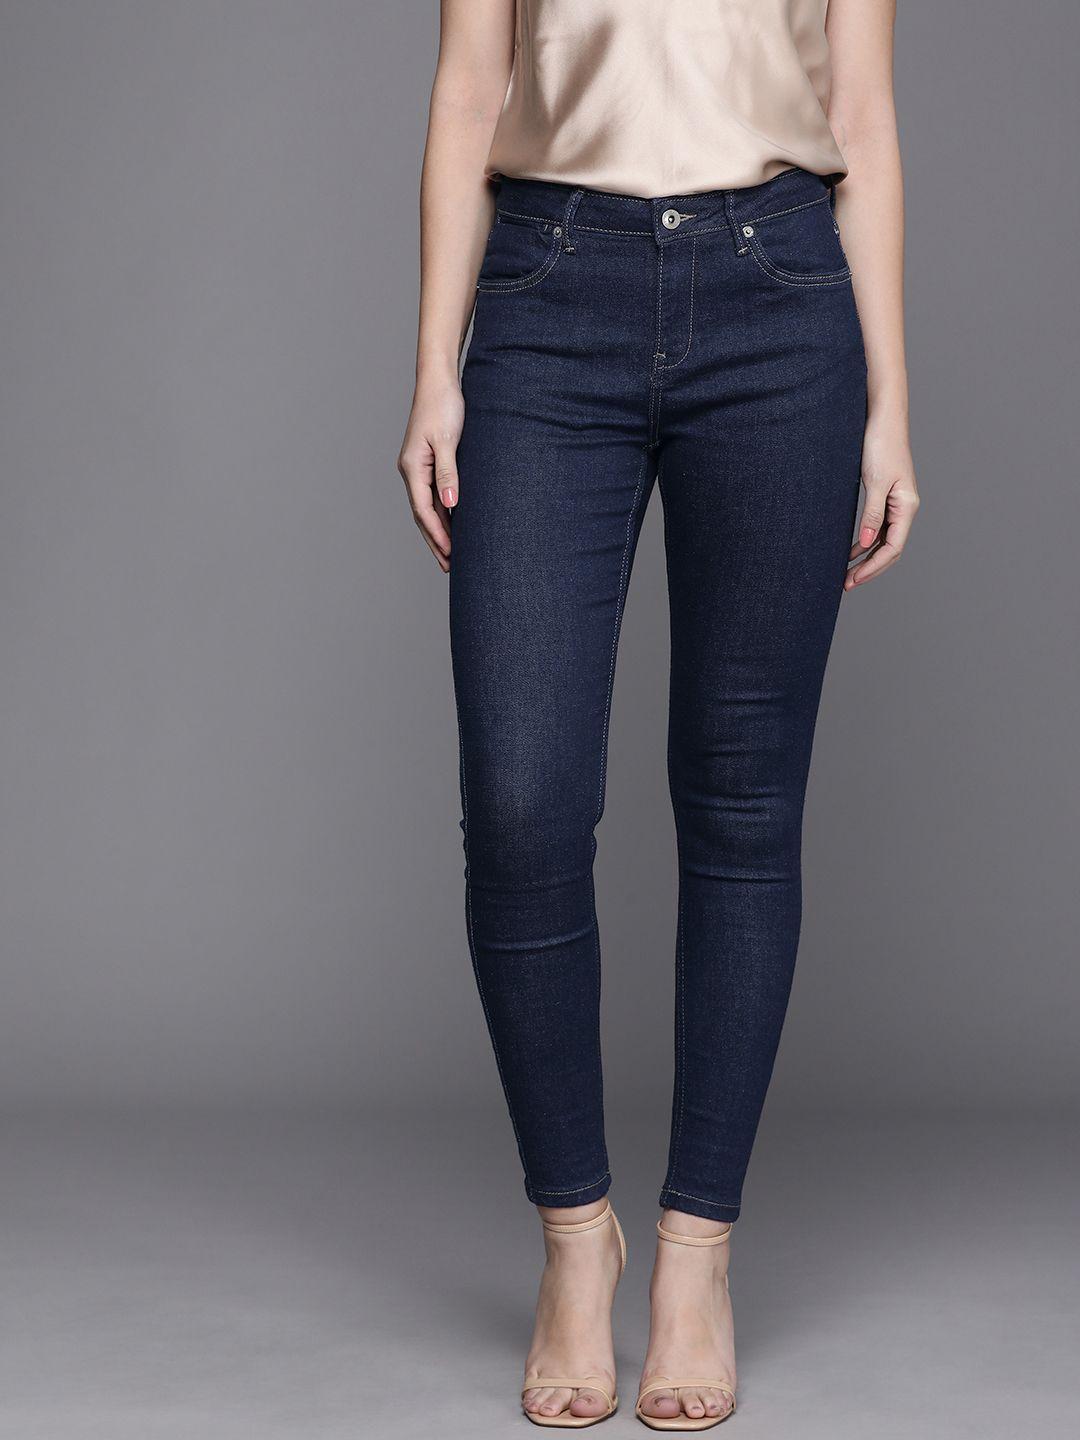 kenneth-cole-women-skinny-fit-stretchable-jeans